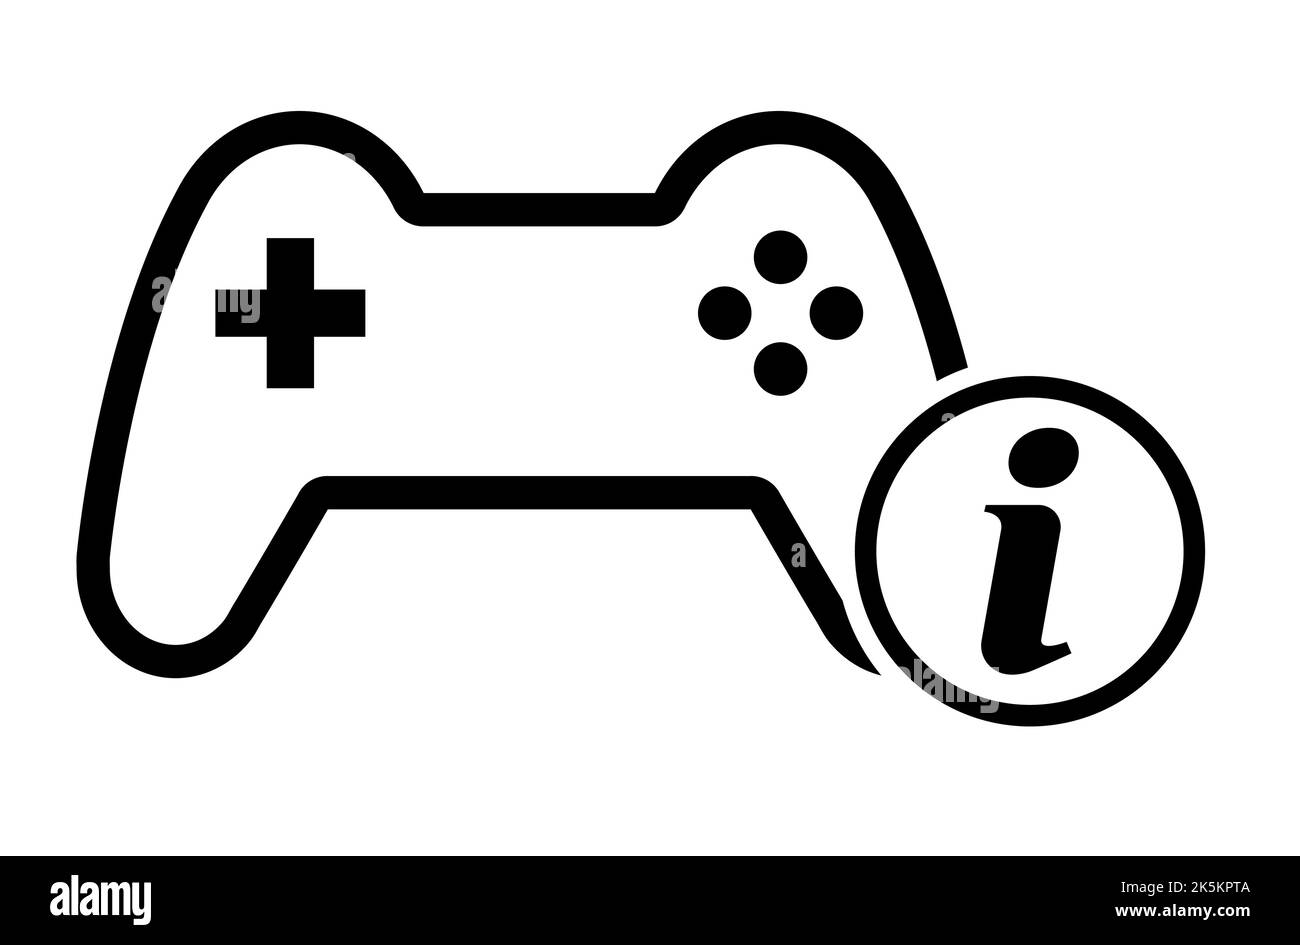 Console gaming gamepad icon, joystick gadget technology button vector illustration, play fun game . Stock Vector